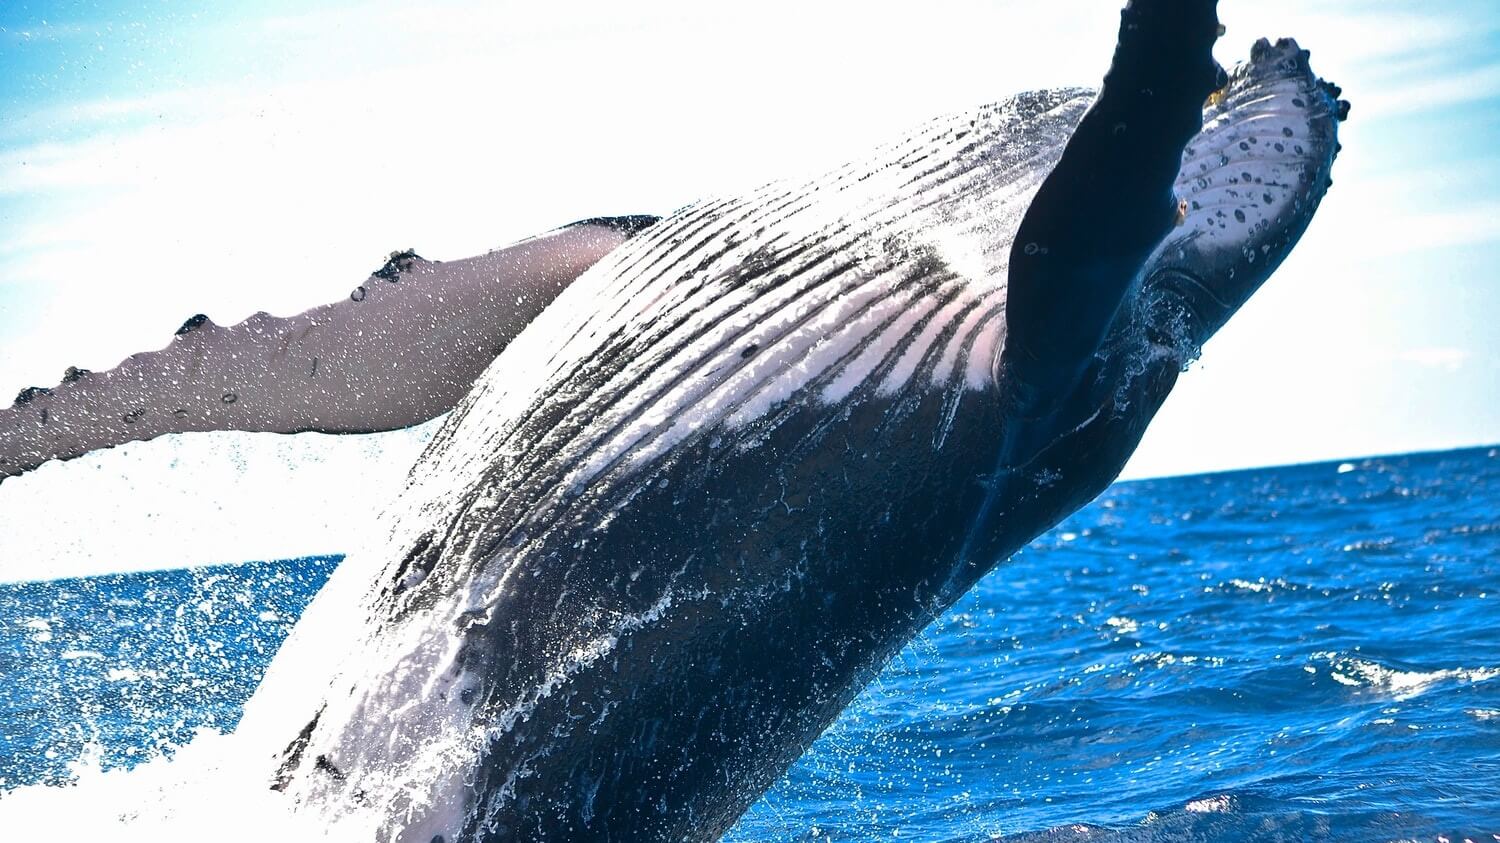 If We Want to Save The Whales, We Must Stop Eating Fish